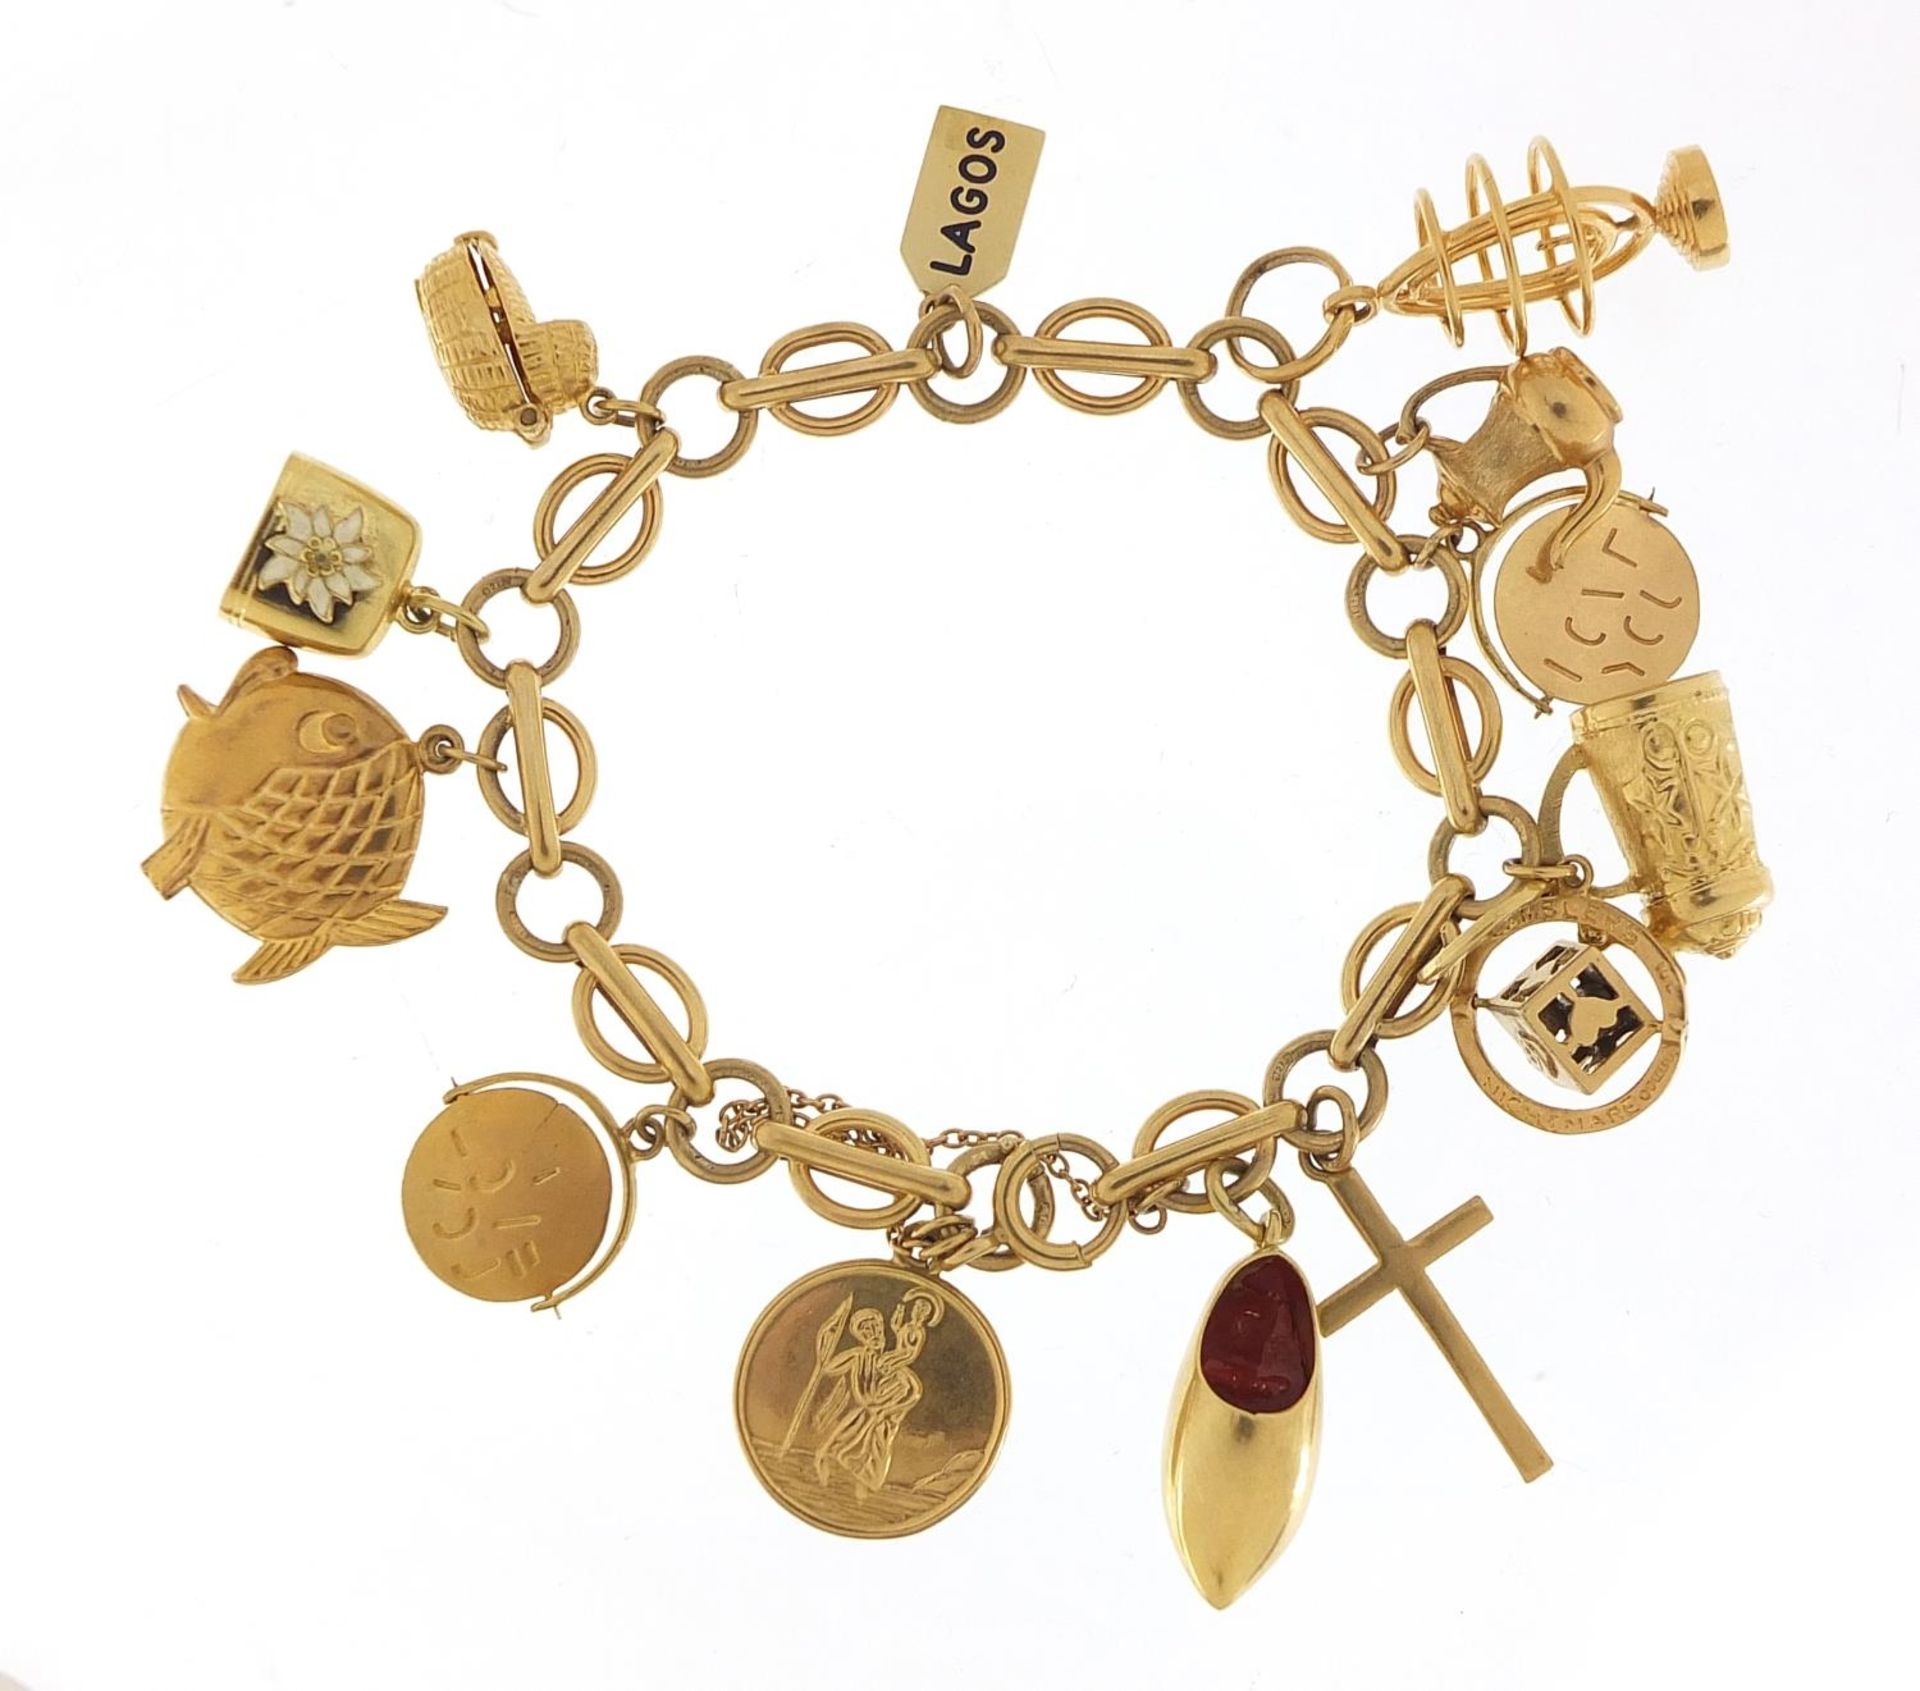 9ct gold charm bracelet with a selection of mostly gold charms including St Christopher, Dutch